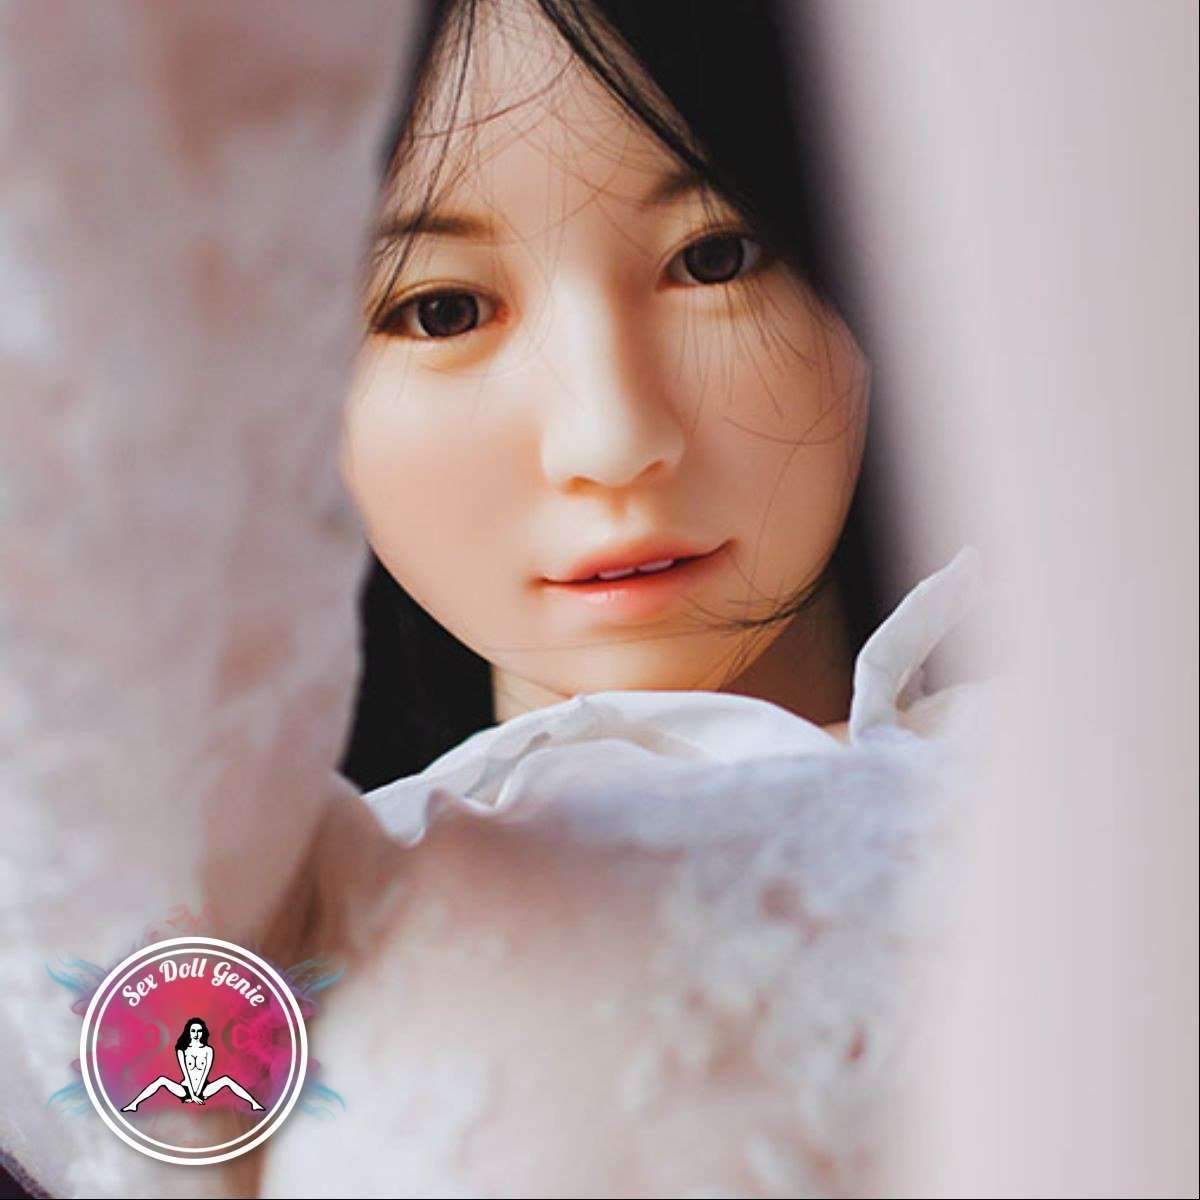 DS Doll - 158Plus - Nanase Head - Type 1 D Cup Silicone Doll-14